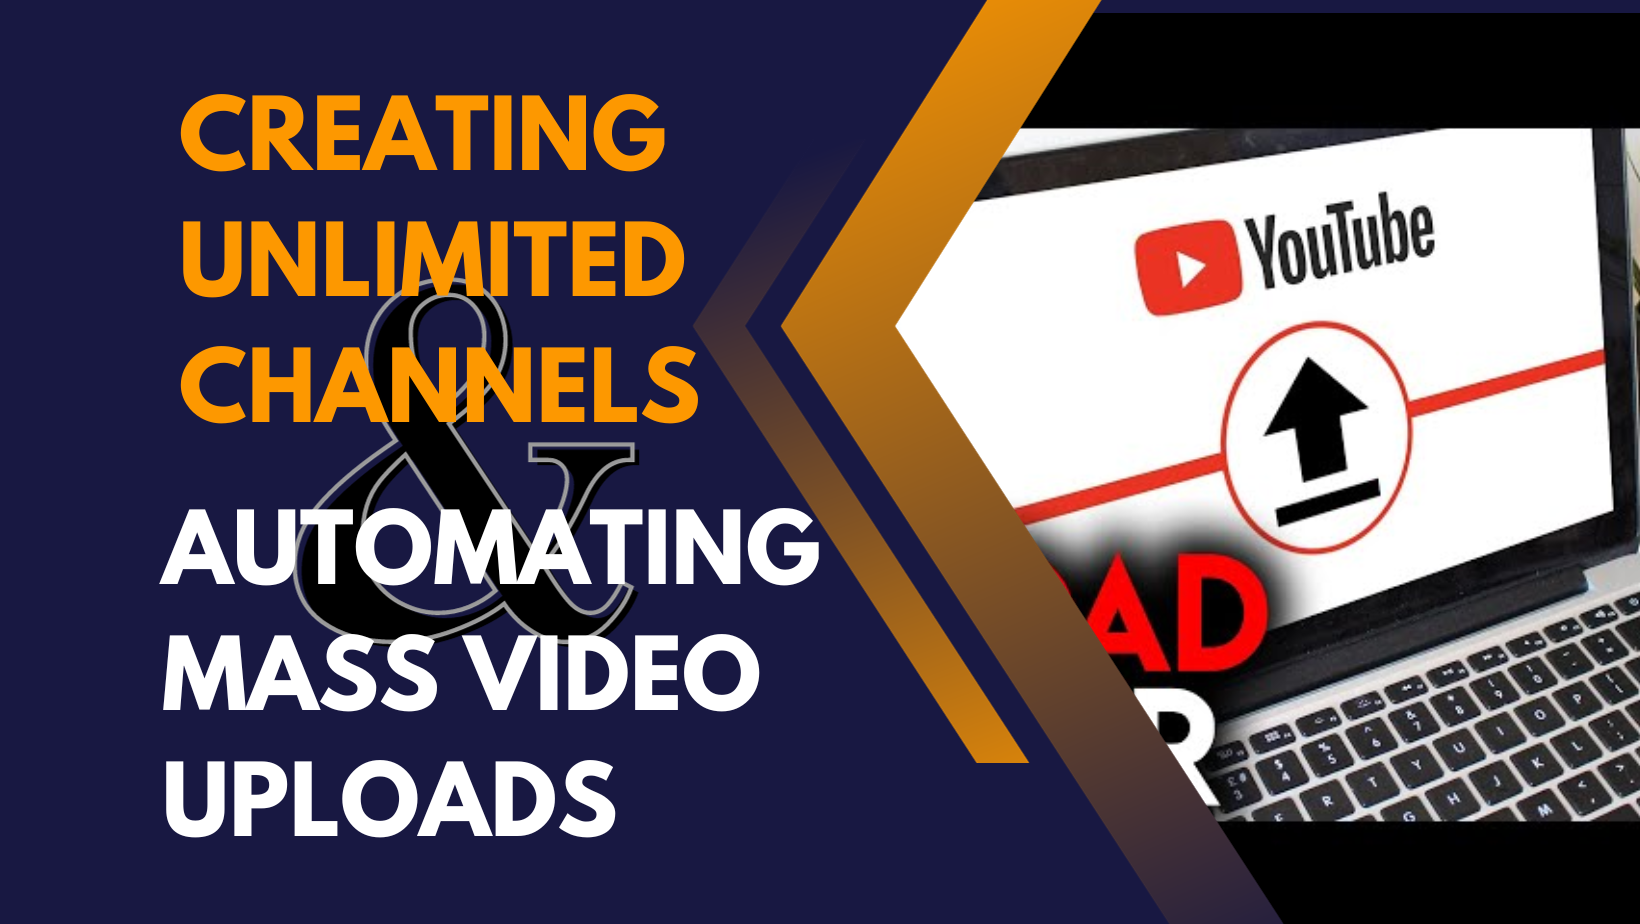 TOP YouTube Bots – Creating Unlimited Channels and Automating Mass Video Uploads